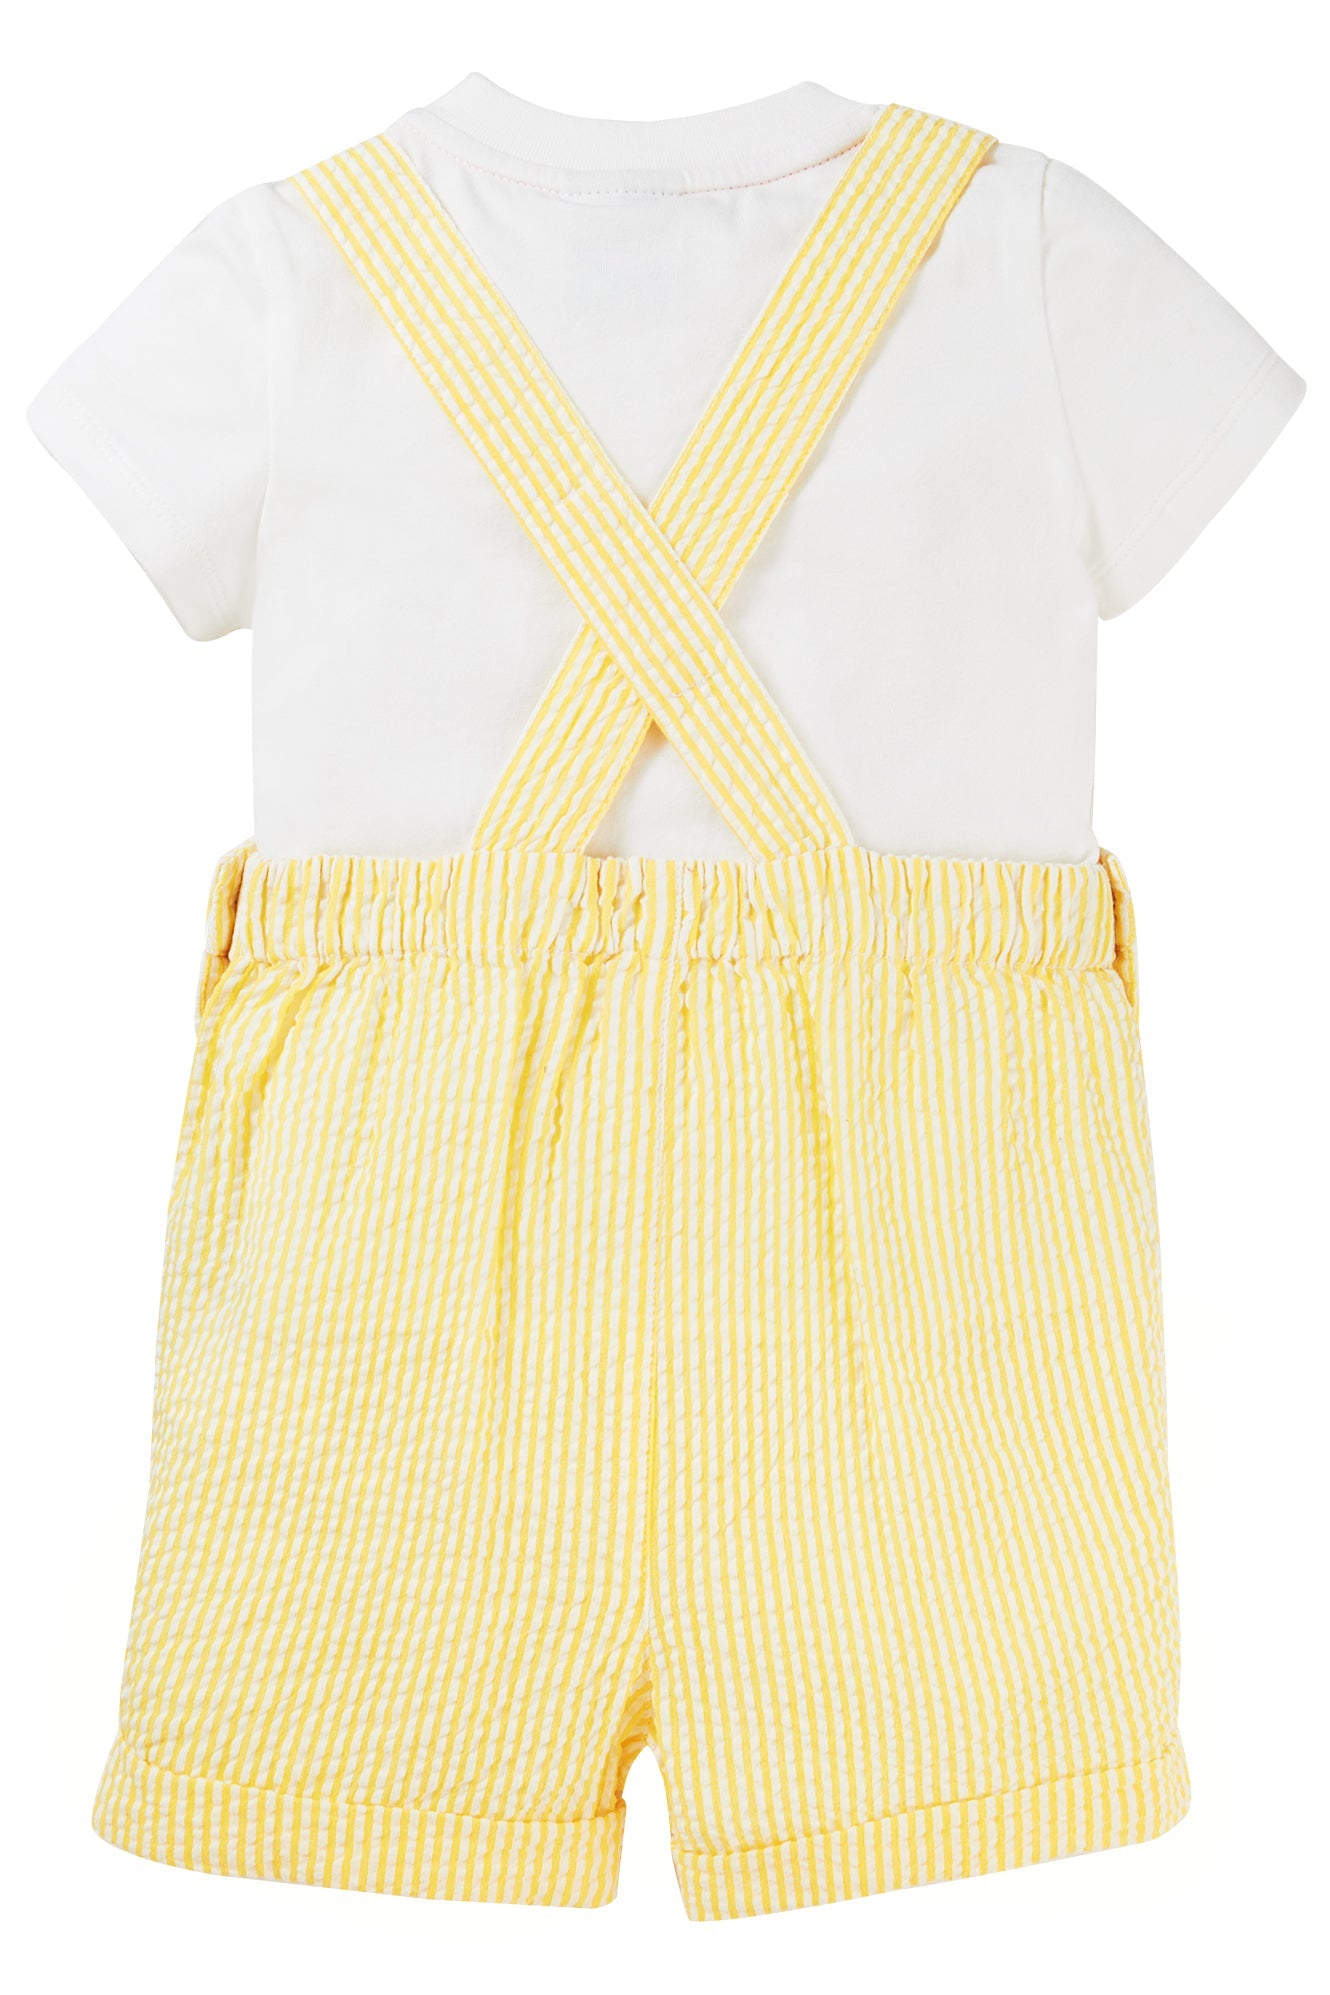 Frugi Godrevy Dungaree Outfit-Kids-Ohh! By Gum - Shop Sustainable